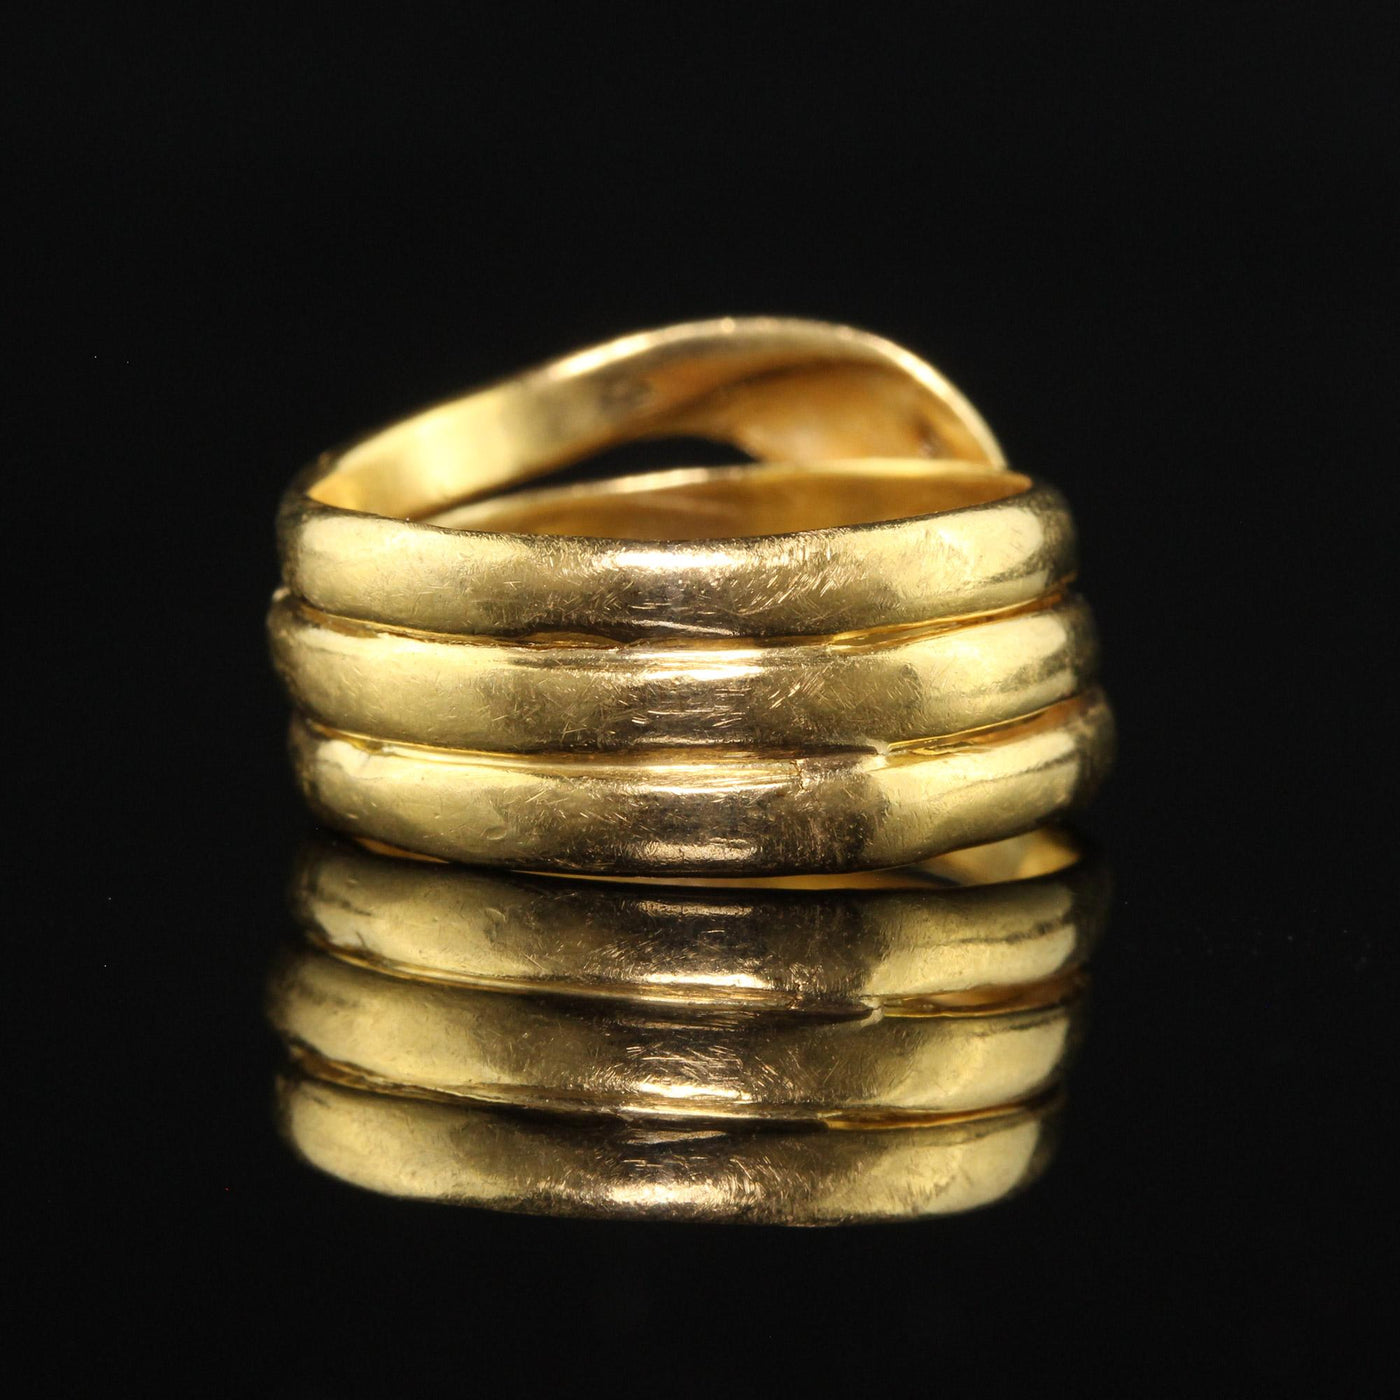 Antique Victorian 18K Yellow Gold Diamond Coiled Snaked Ring